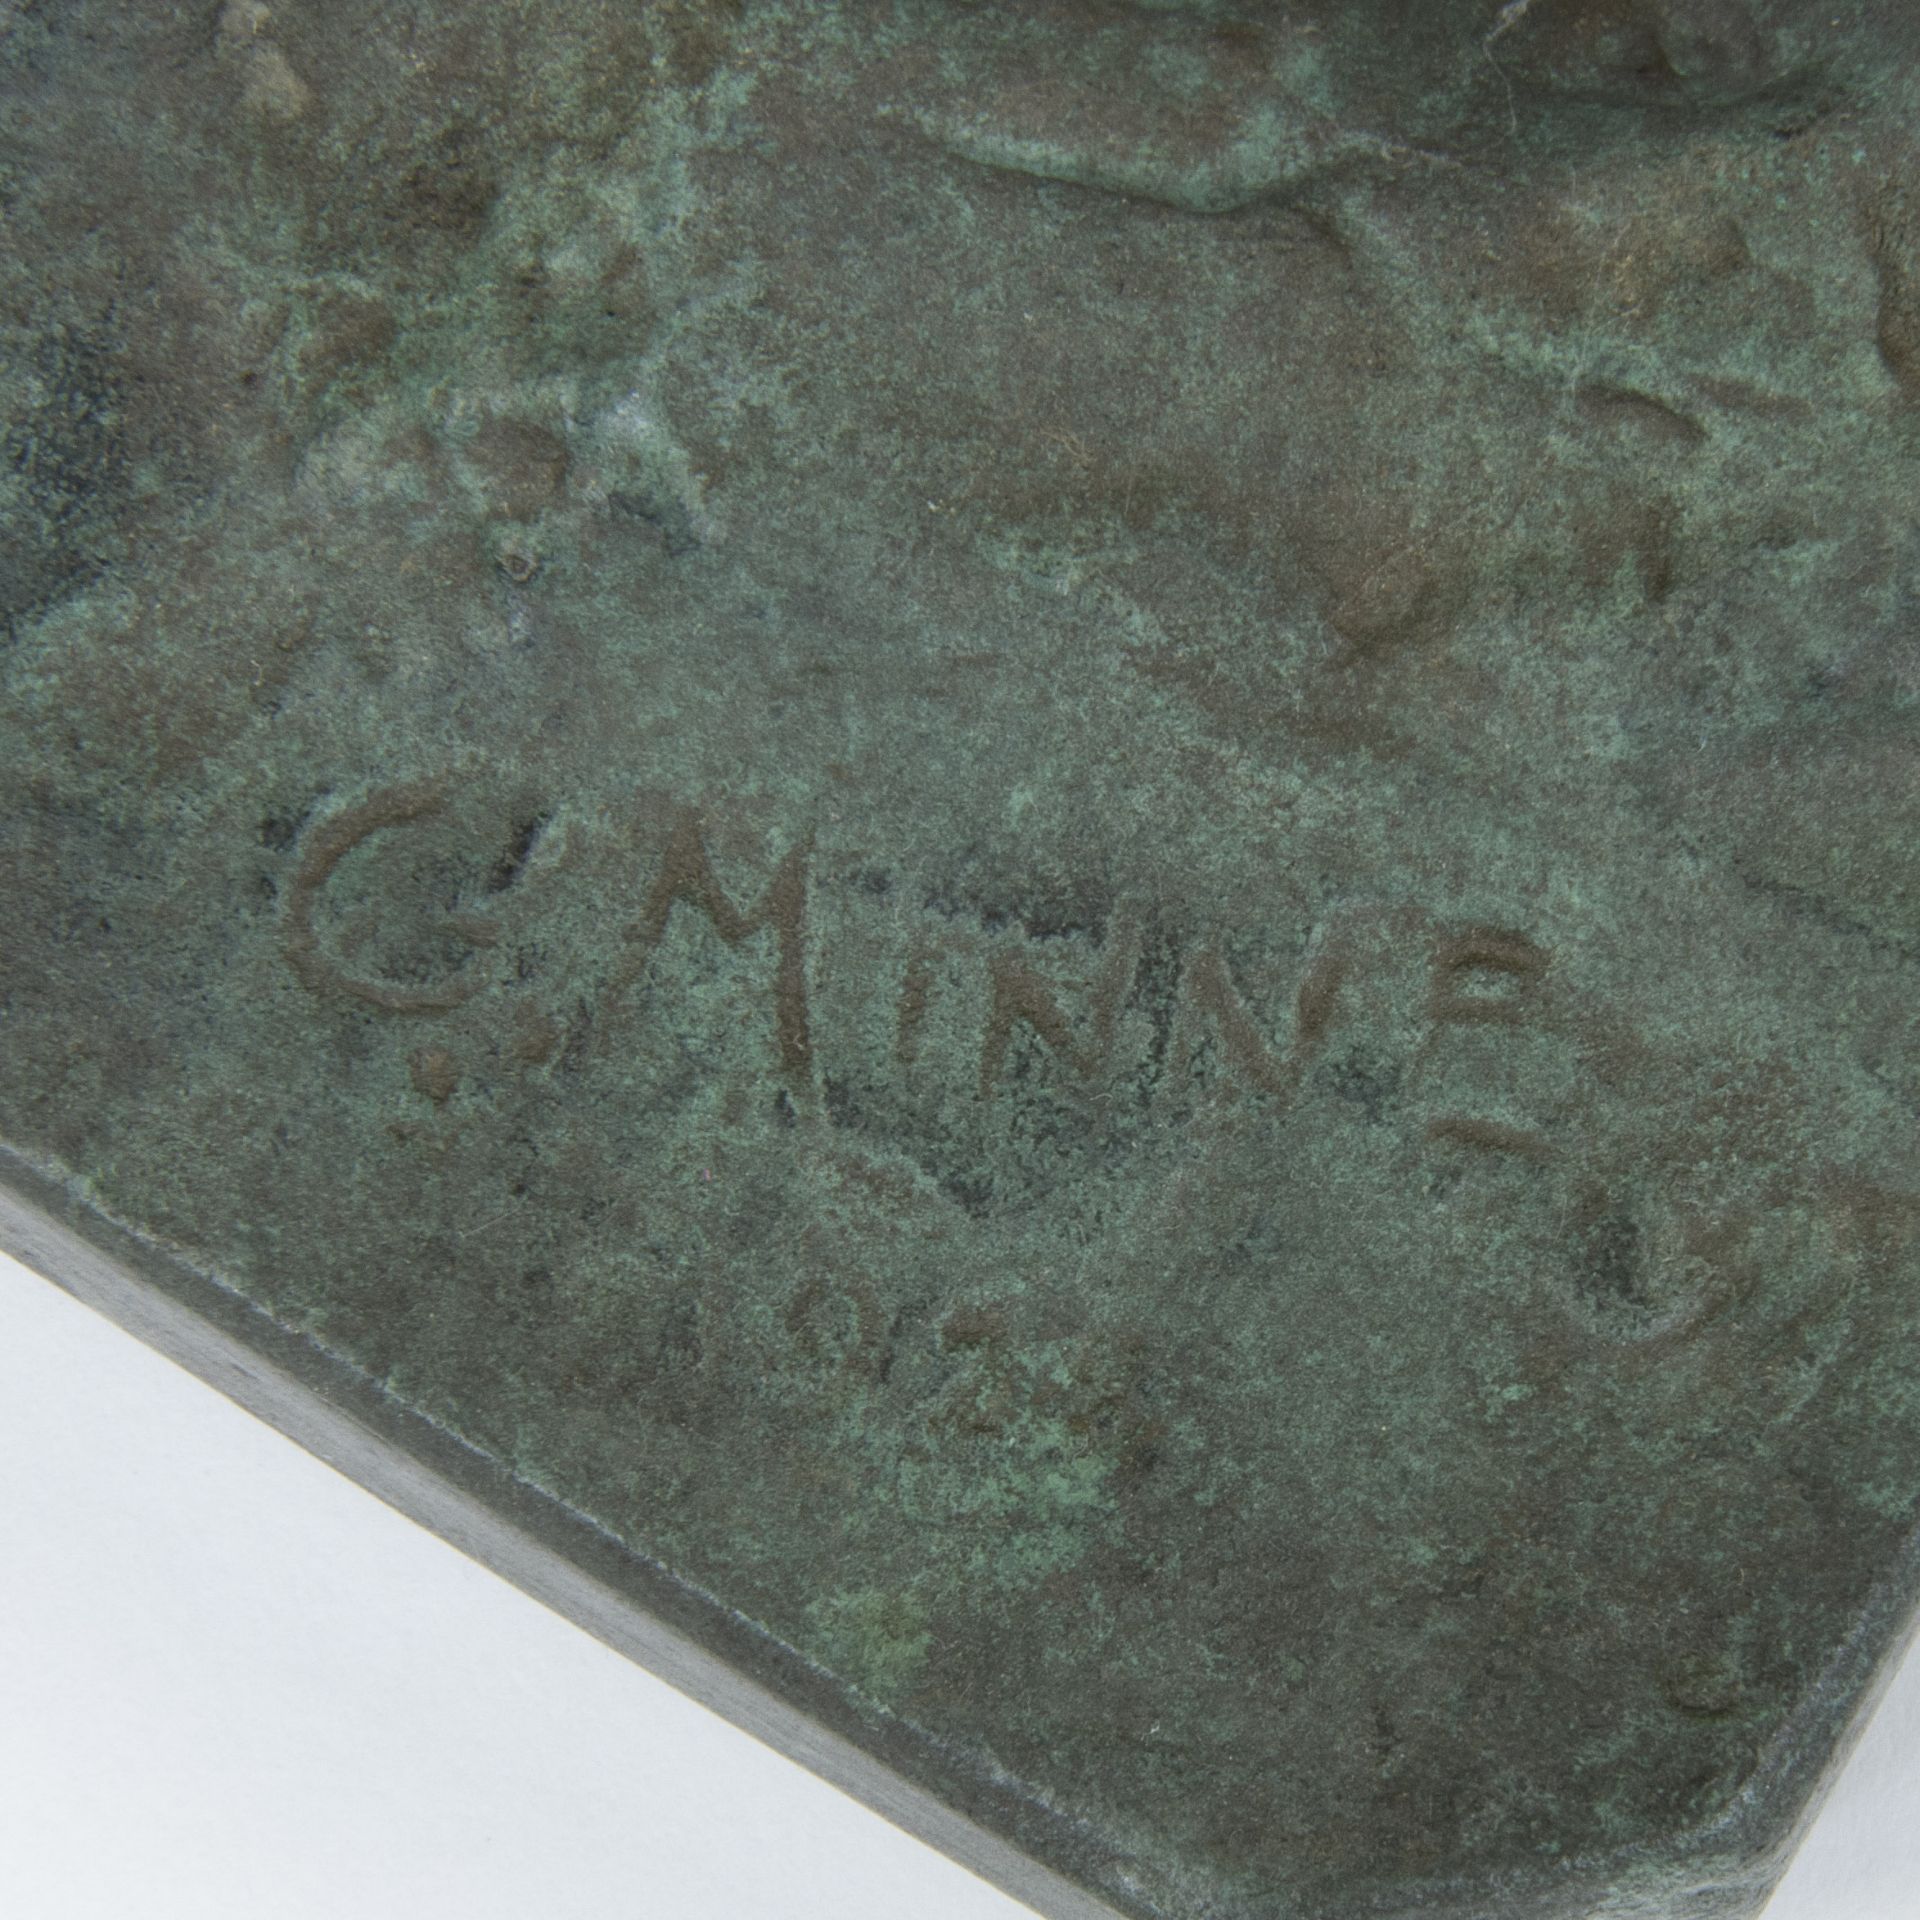 George MINNE (1866-1941), bronze Mother and child, signed and dated 1928 - Image 7 of 8